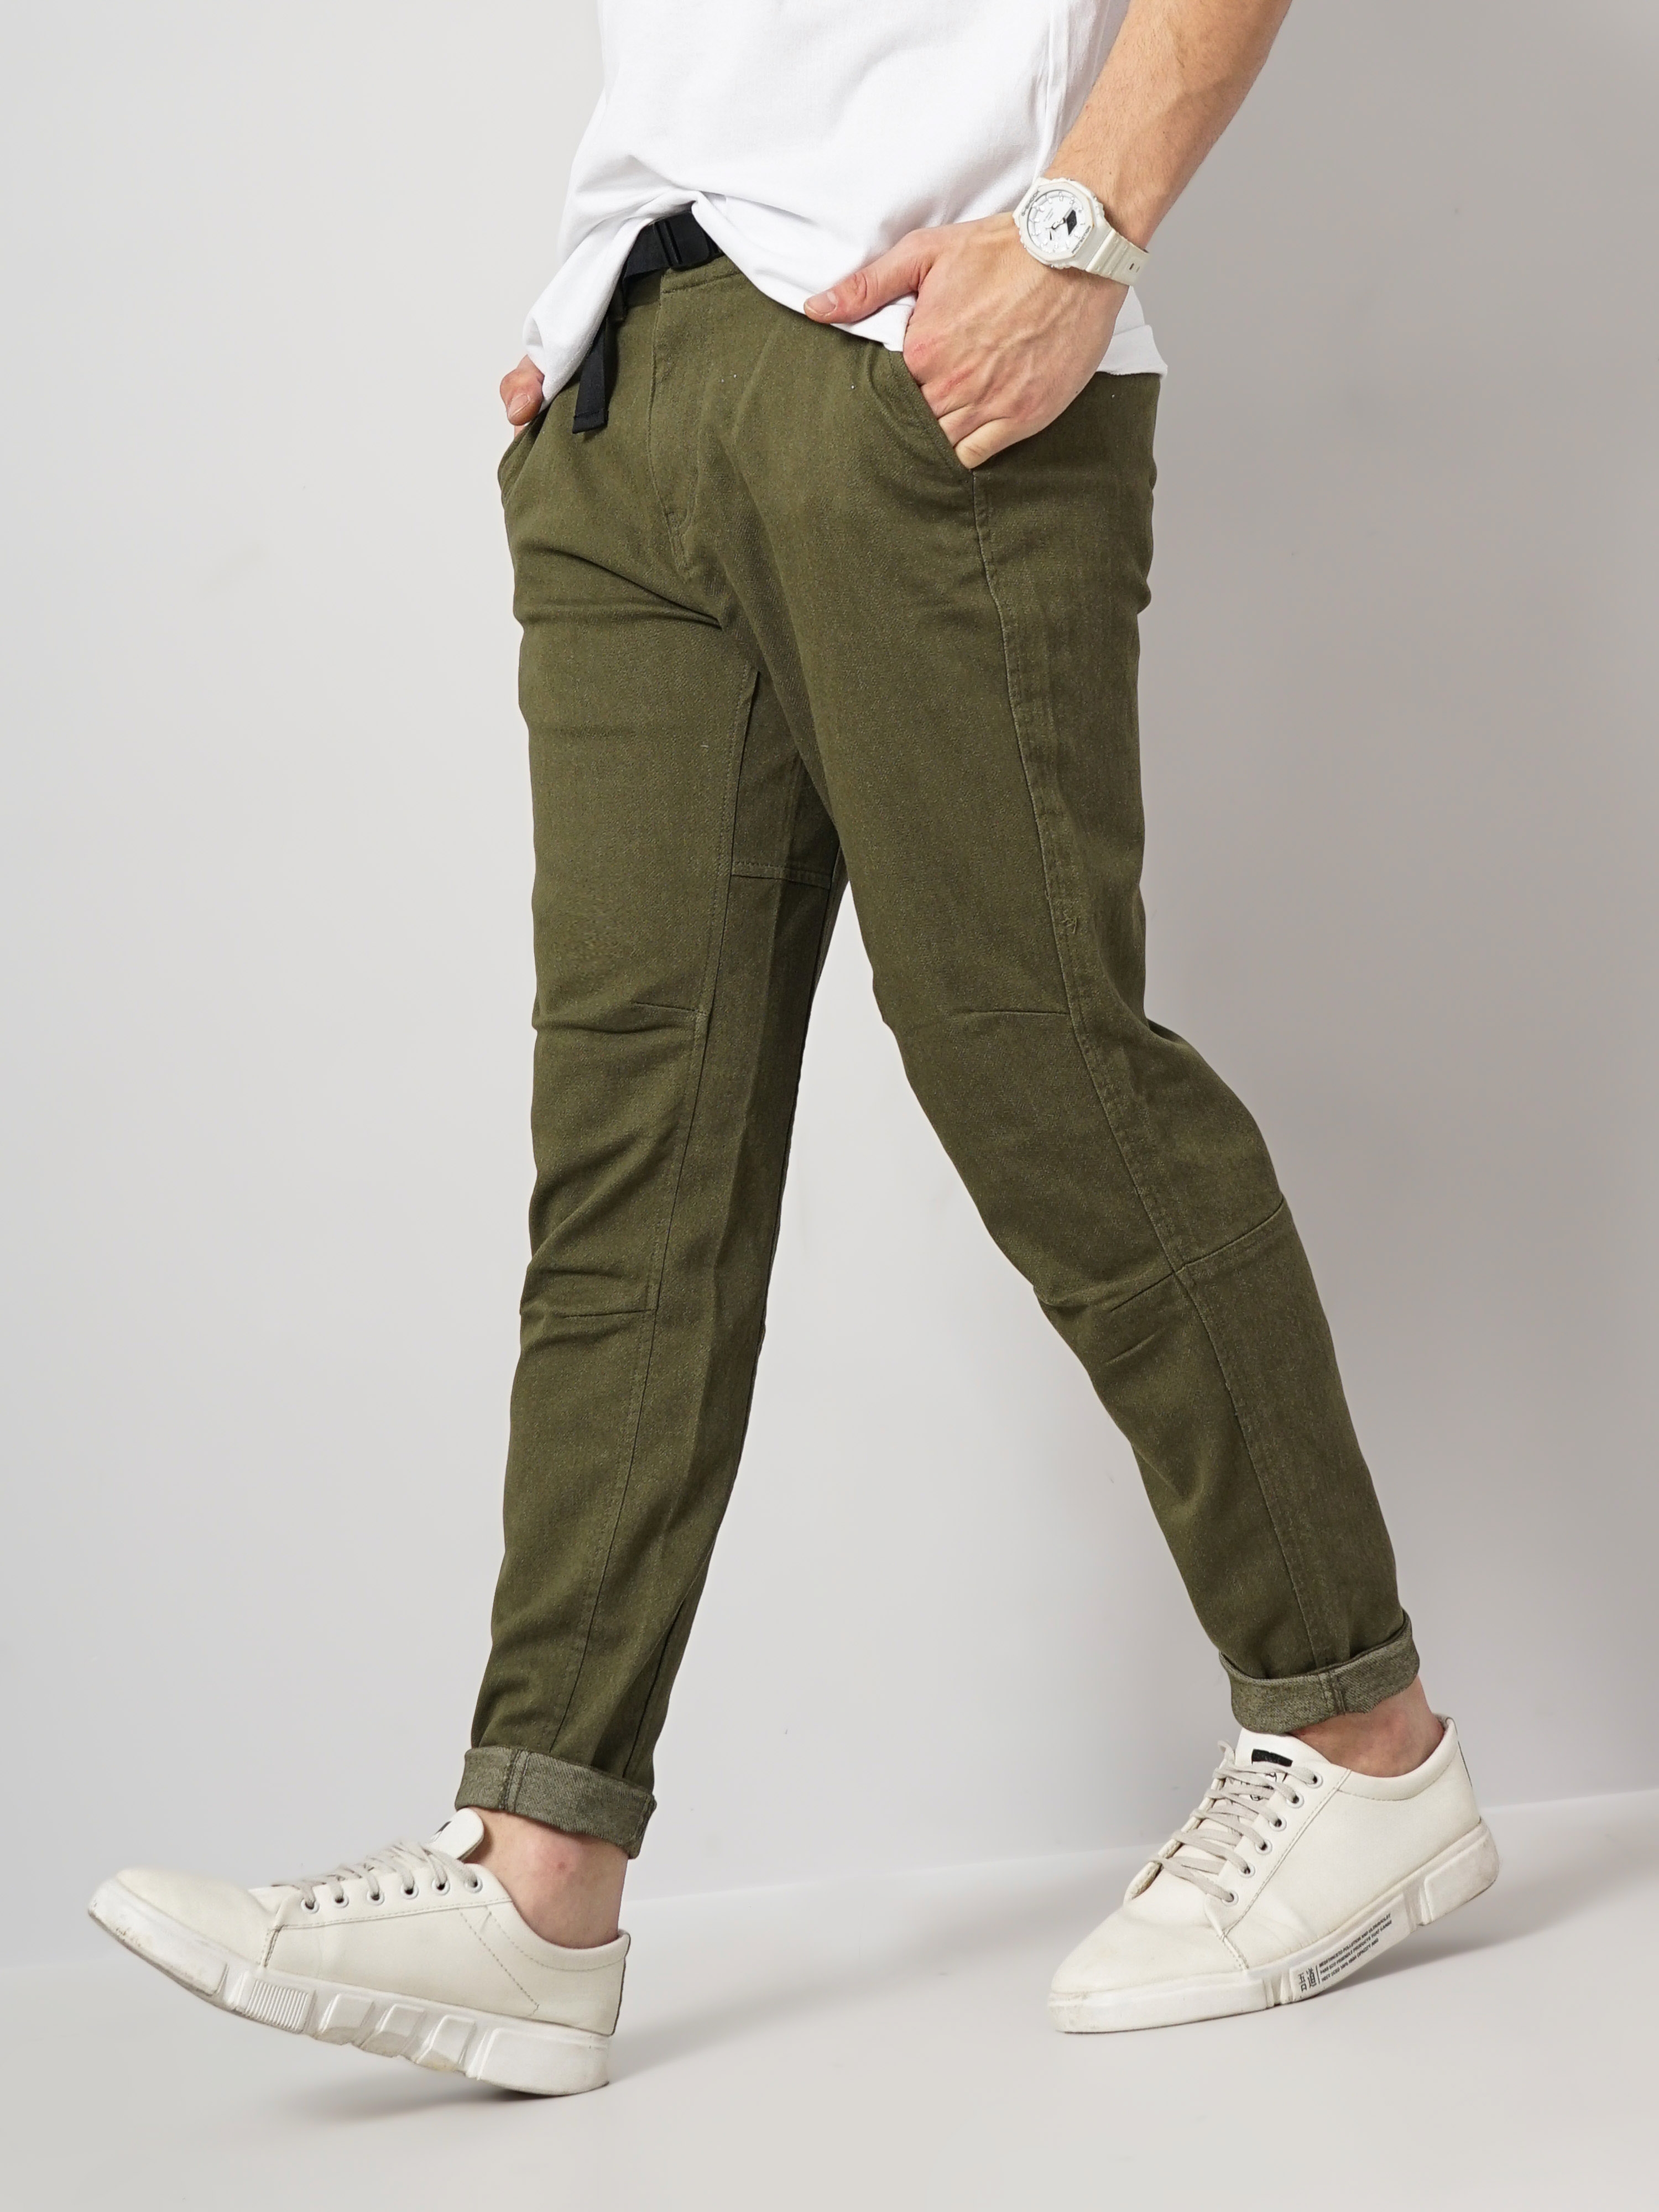 adviicd Men Pants Slim Fit Men Casual Pants Relaxed Fit Mens Fashion Cotton  And Printed Pocket Lace Up Pants Large Size Pants Green 2XL - Walmart.com